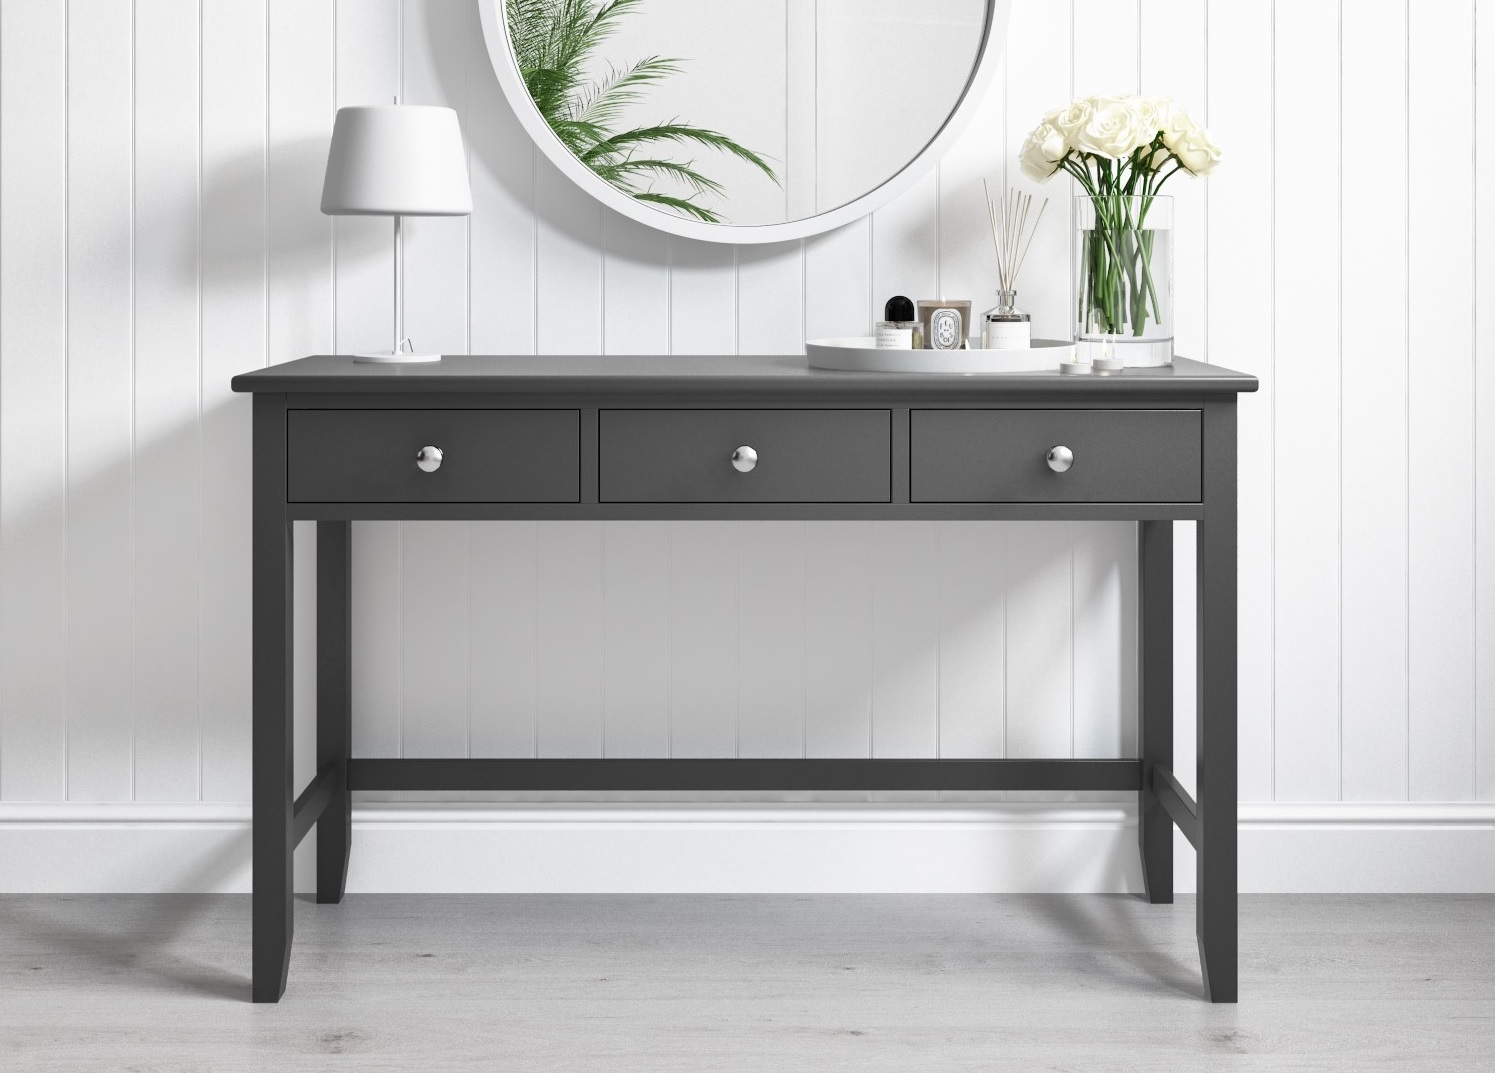 Top 10 Brands to Buy Console Tables Online & Instore